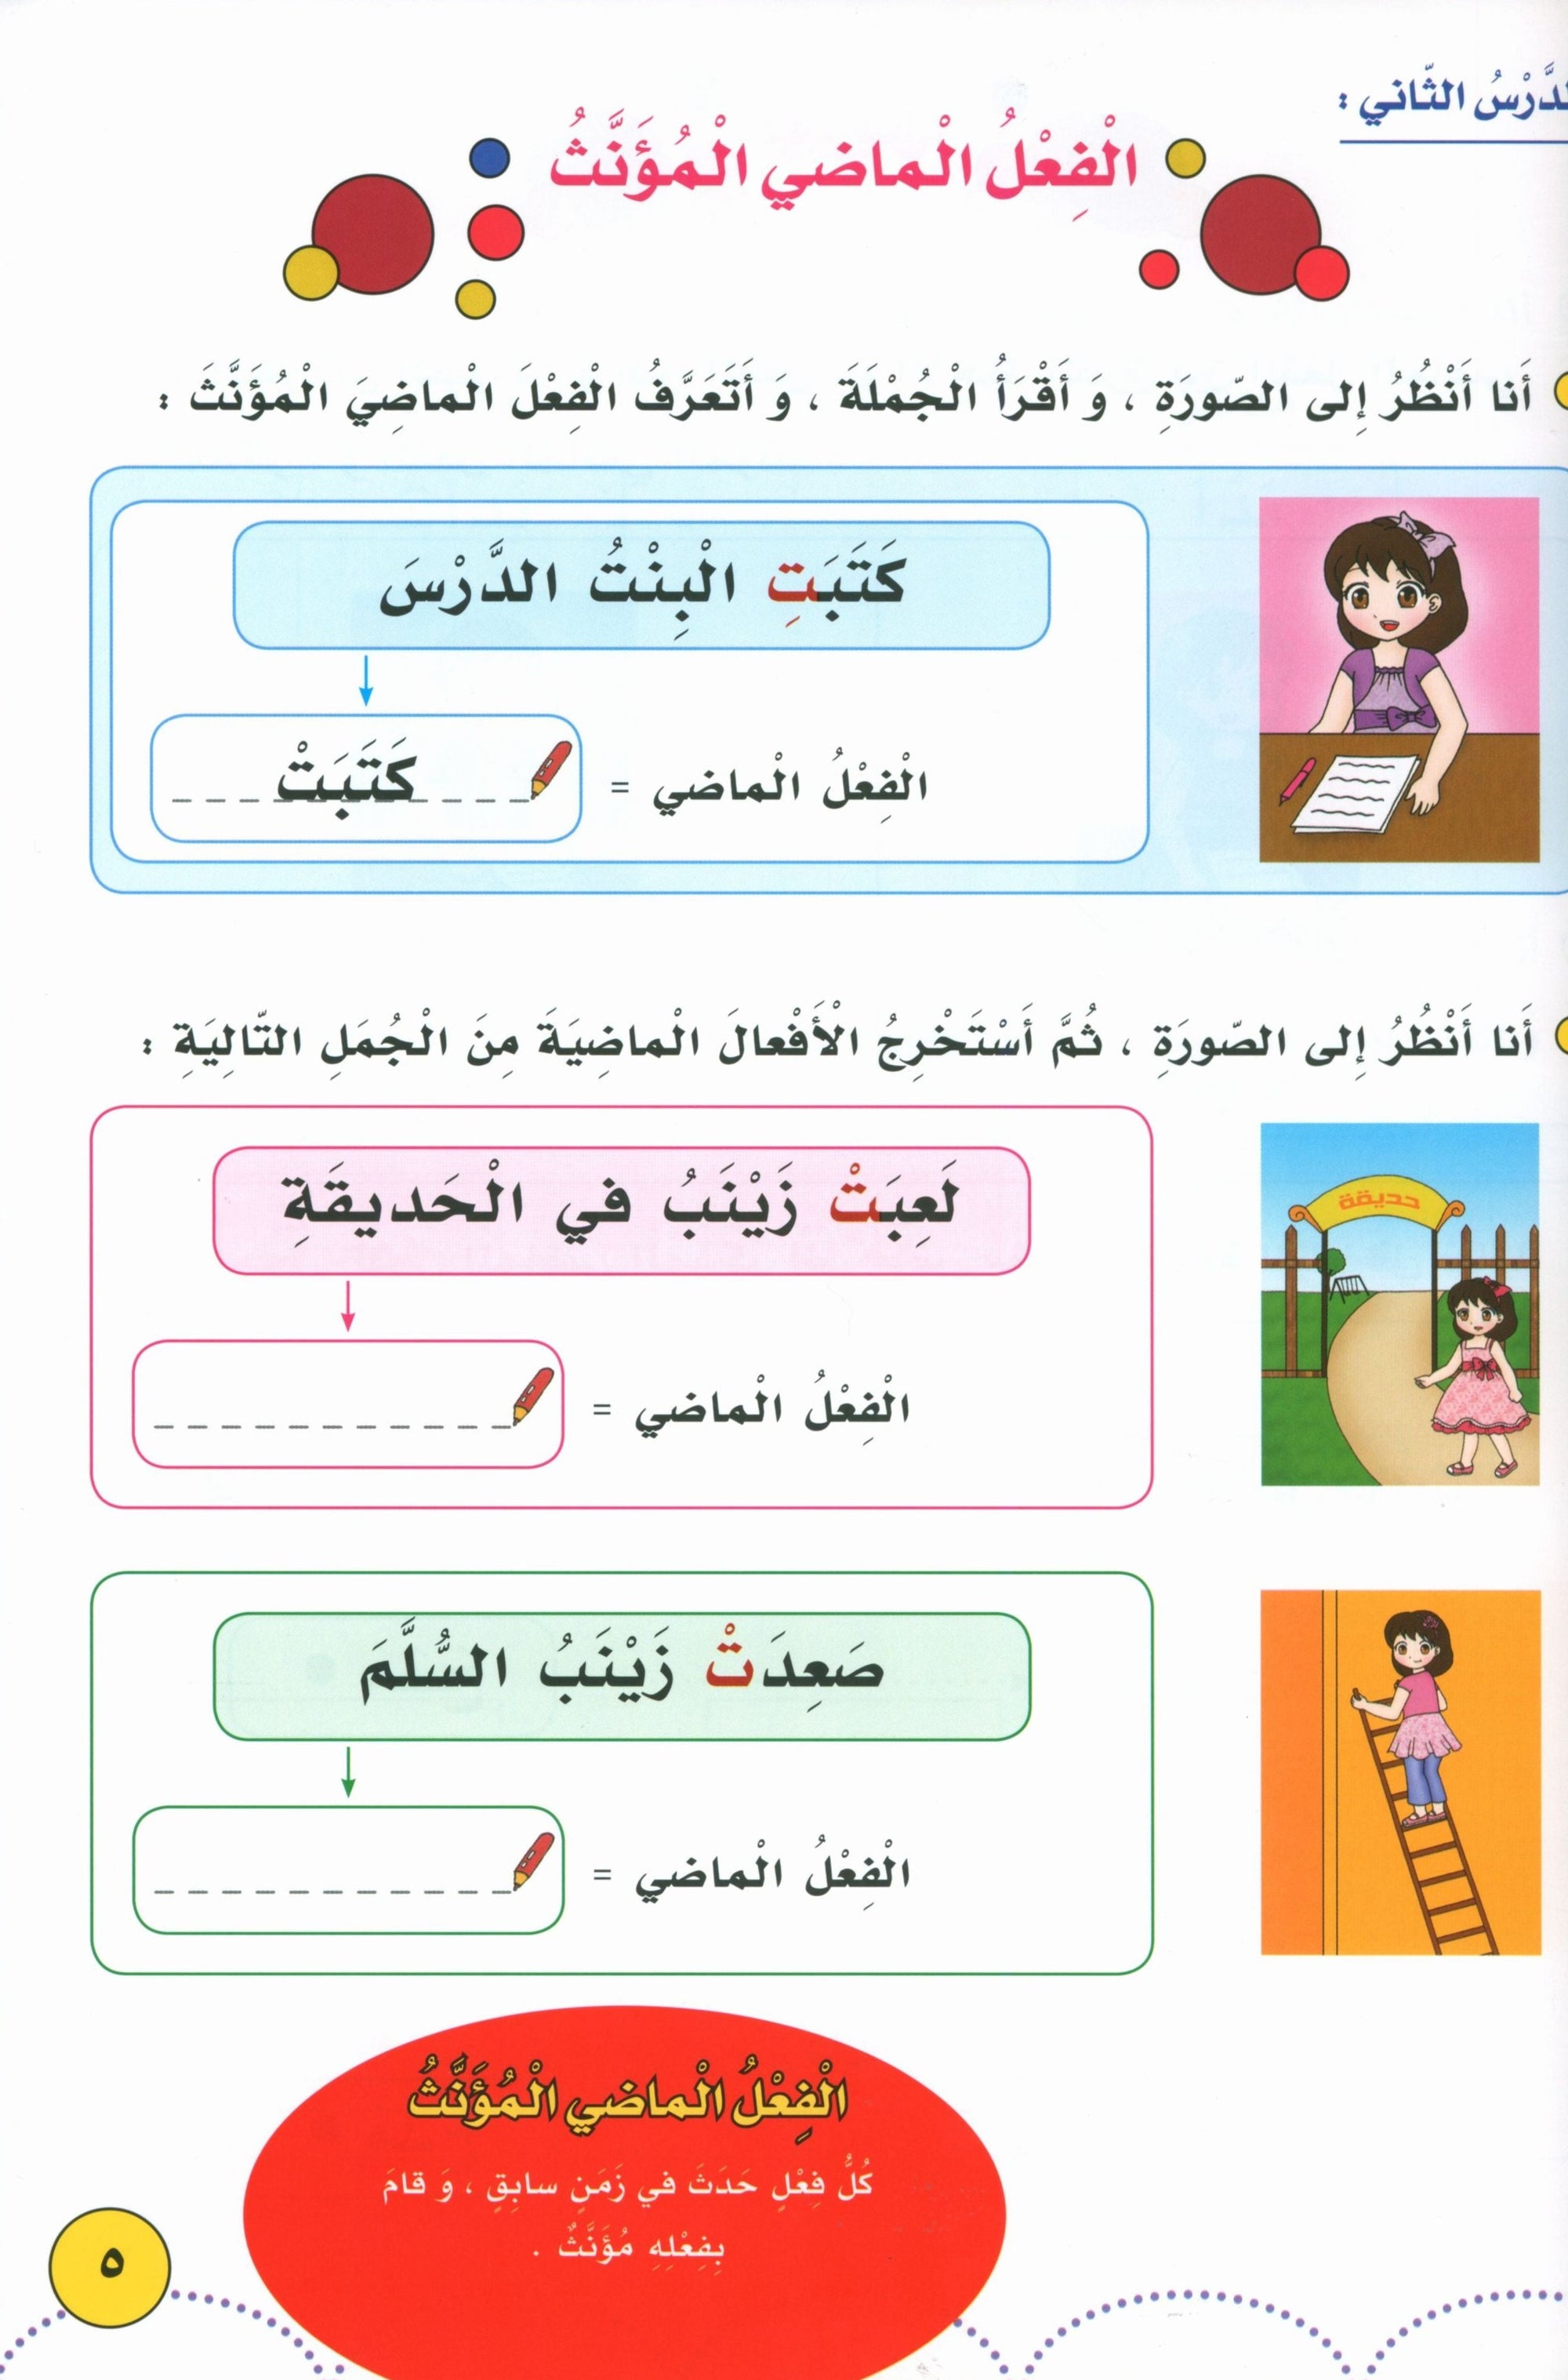 My Language Is My Identity Part 2 لغتي هويتي